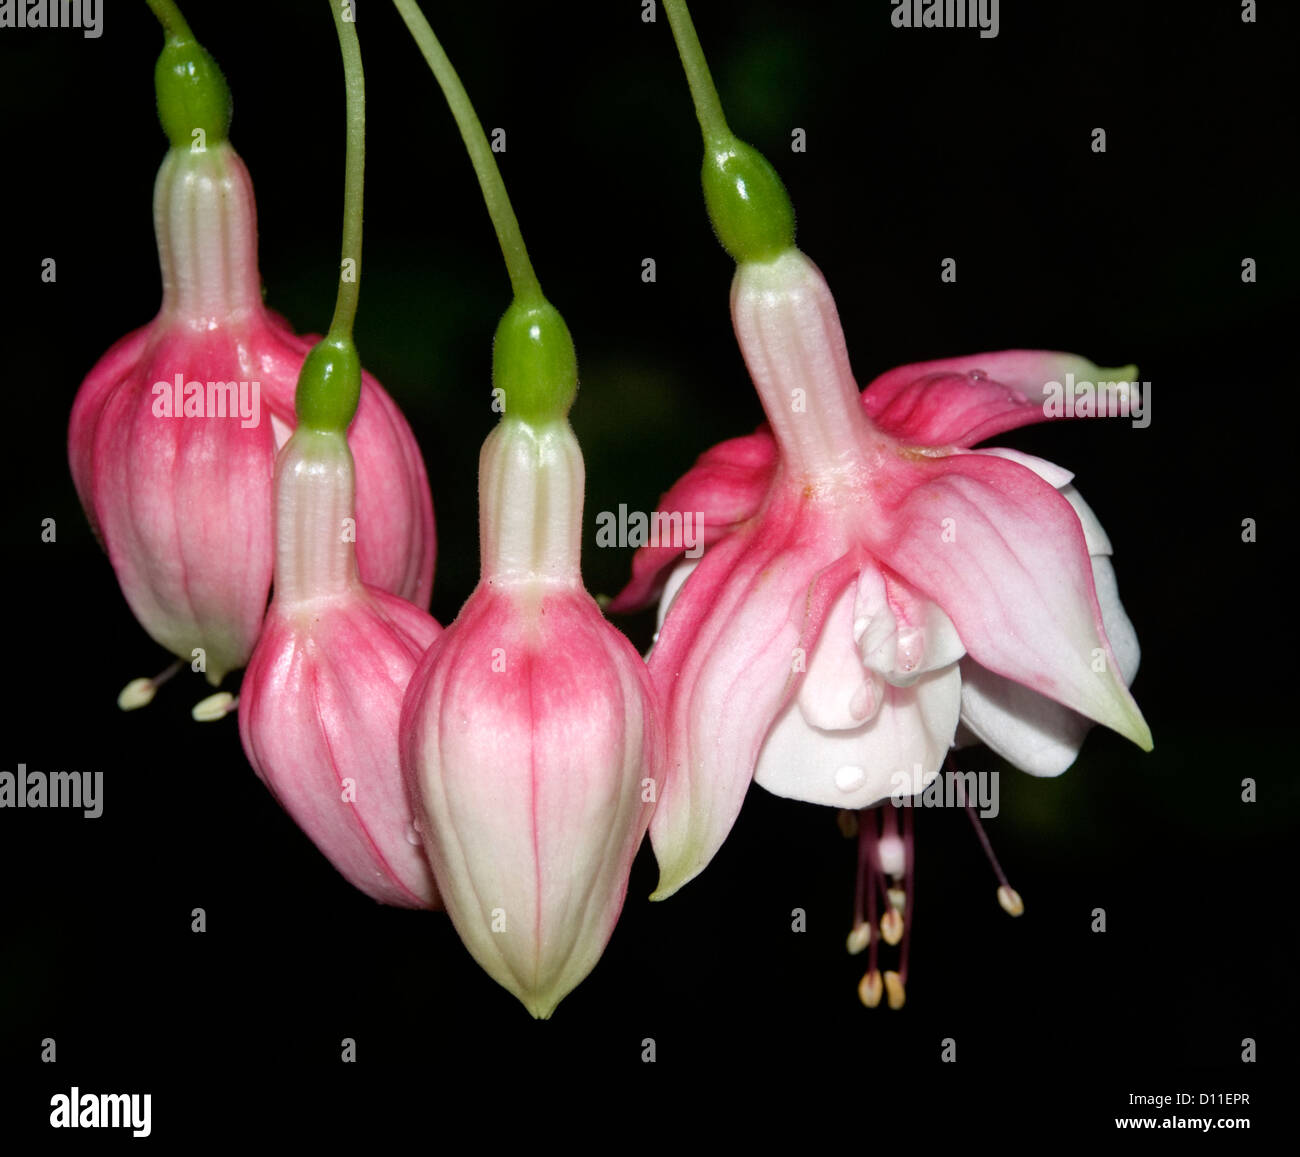 Cluster of beautiful pink and white flowers and buds of Fuchsia 'Swing-a-long' against a black background Stock Photo